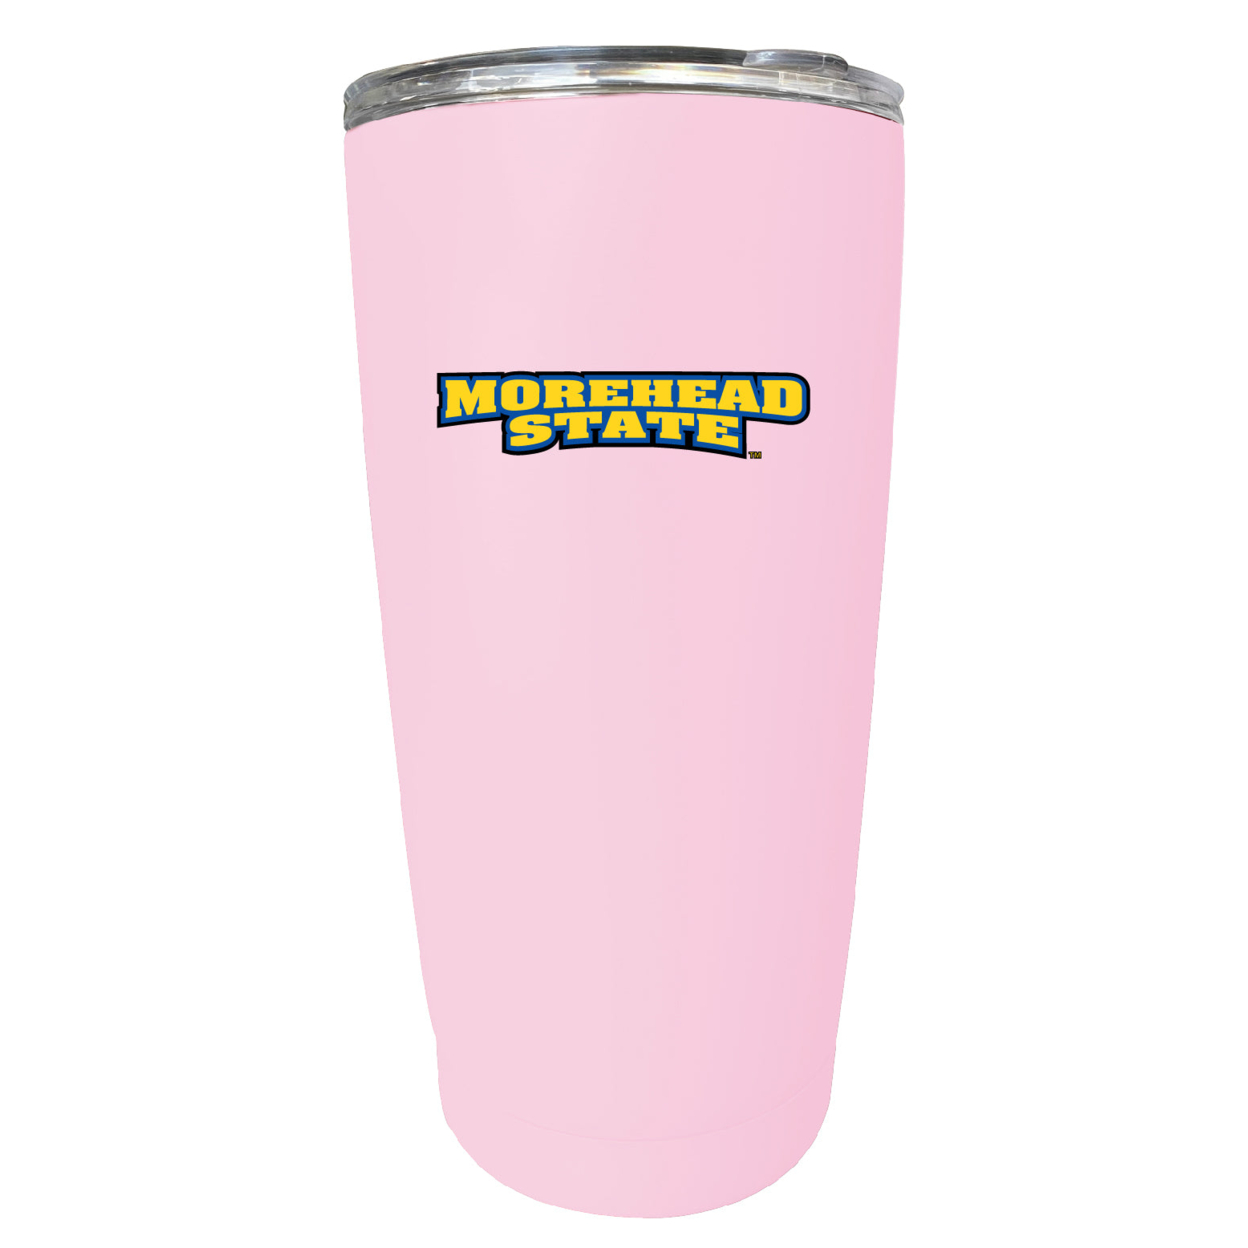 Morehead State University 16 Oz Stainless Steel Insulated Tumbler - Yellow